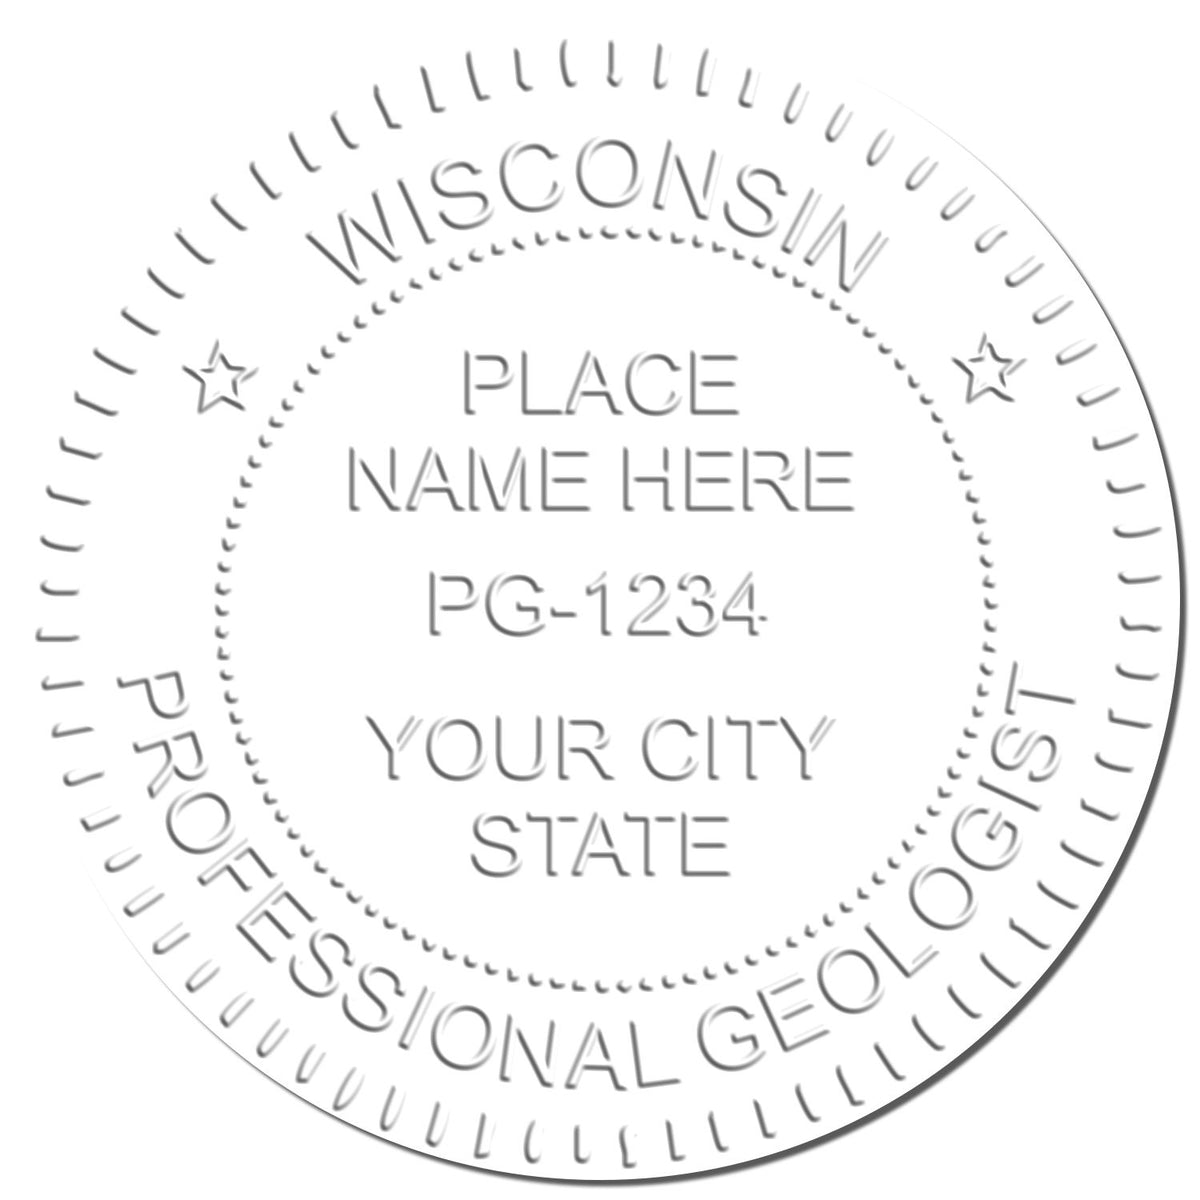 The Wisconsin Geologist Desk Seal stamp impression comes to life with a crisp, detailed image stamped on paper - showcasing true professional quality.